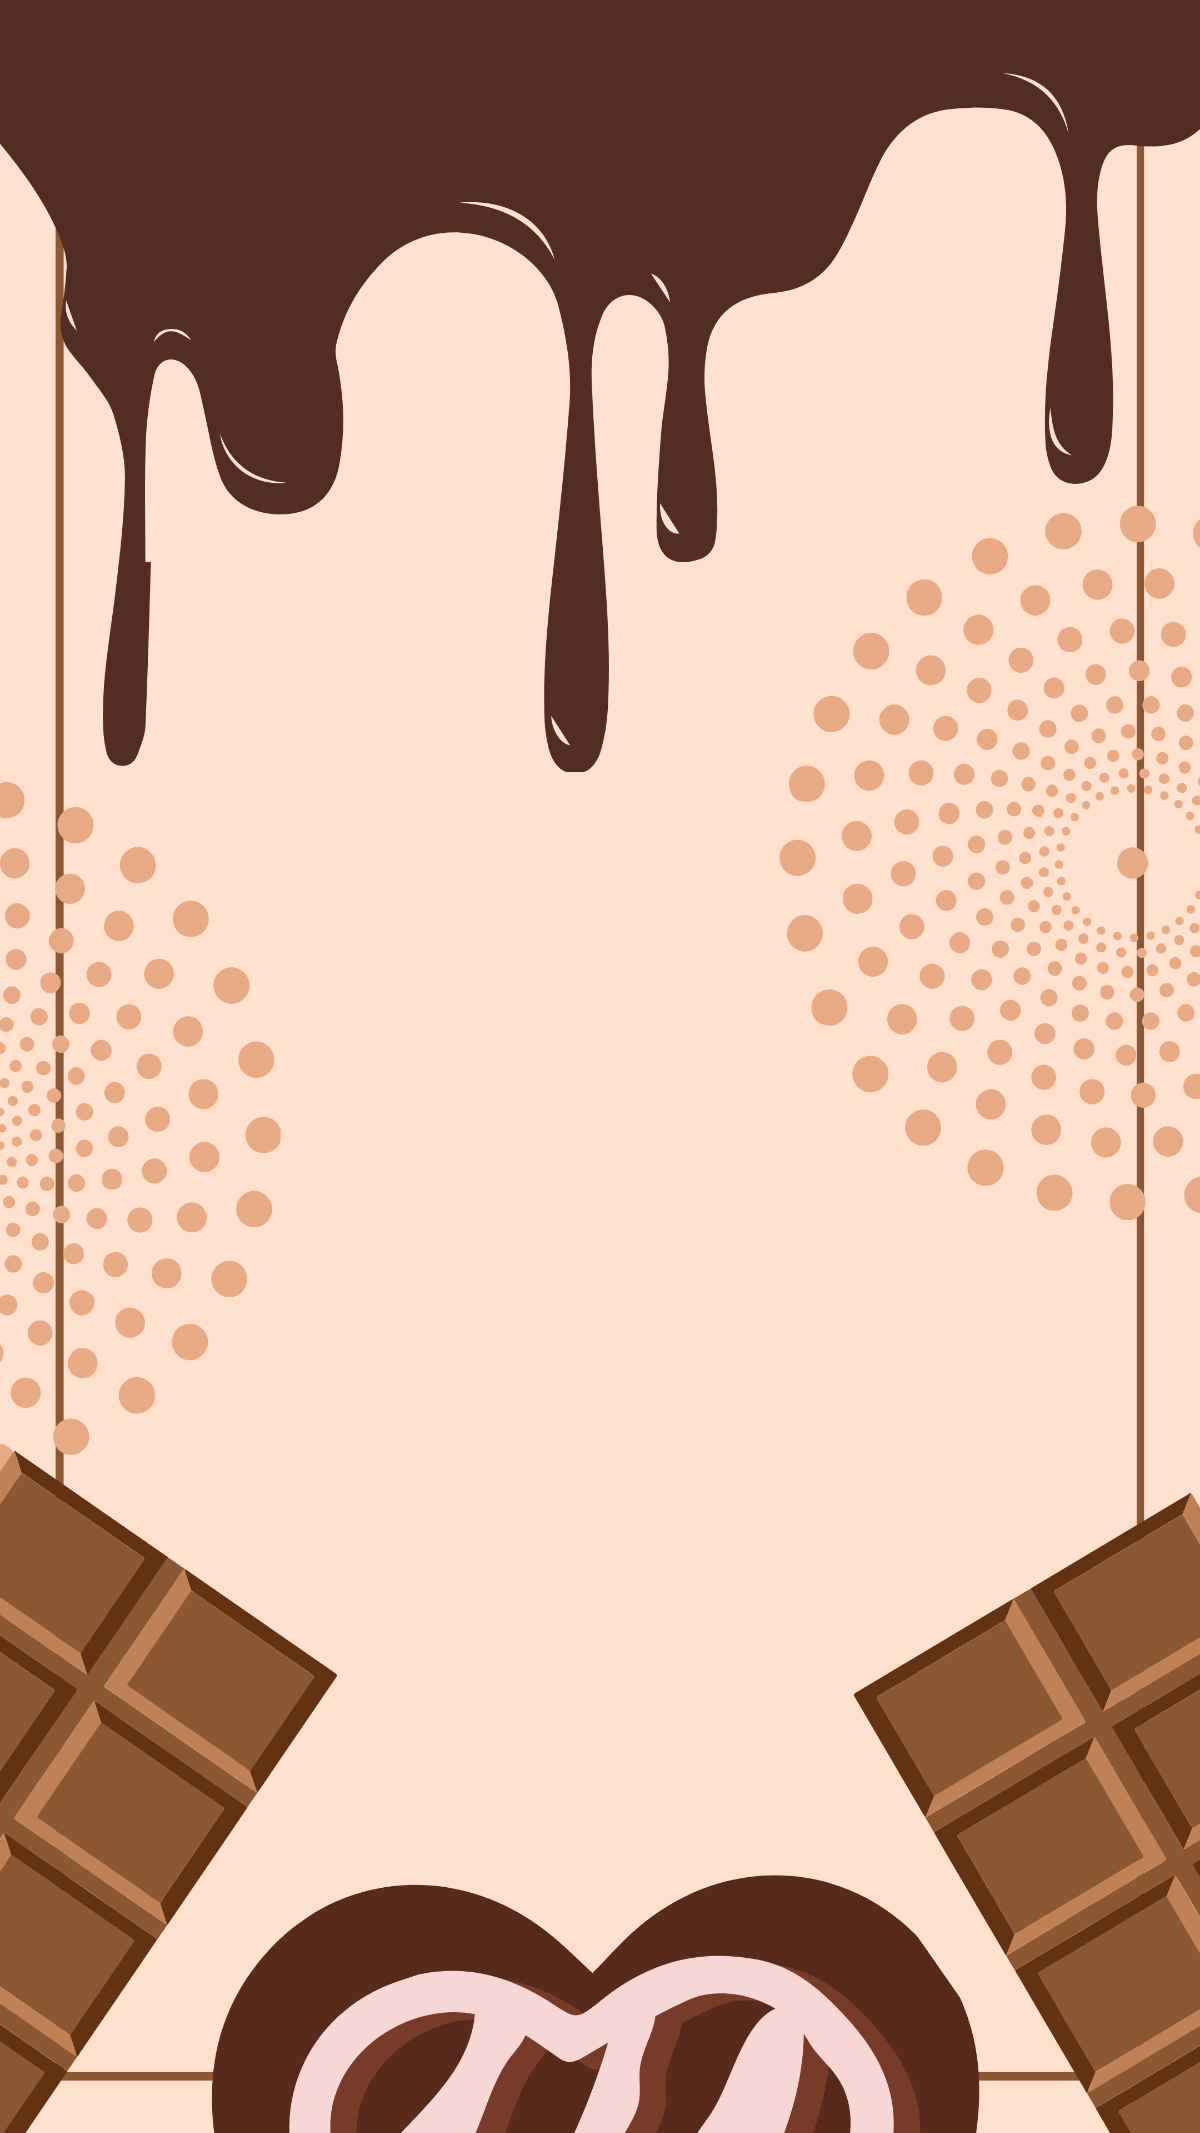 International Chocolate Day iPhone Background Template